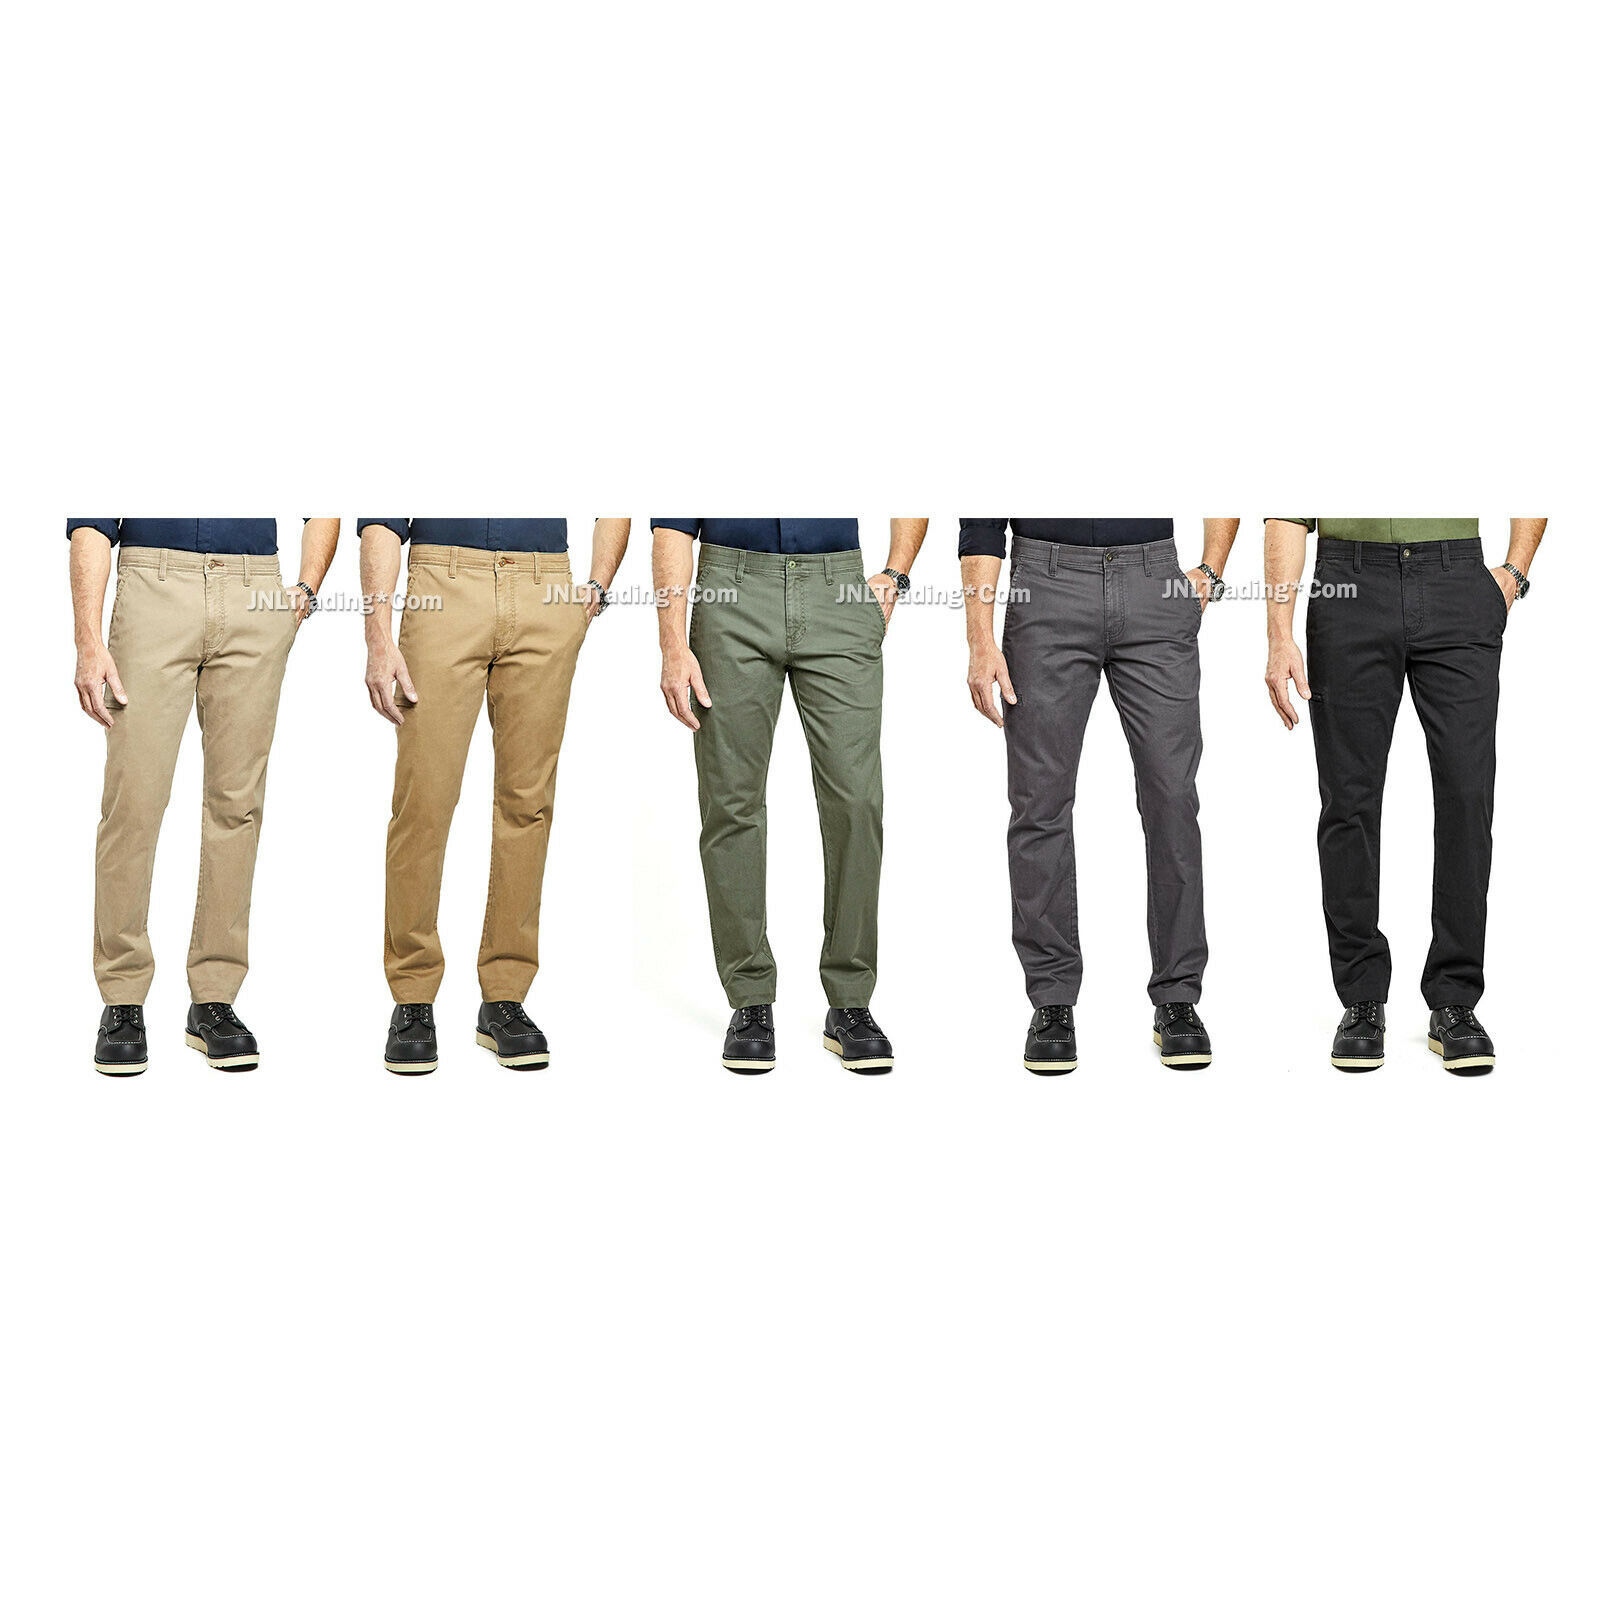 Primary image for NWT Men Weatherproof Zip 5-Pocket Utility Pant Flex Waistband Stretch Fabric $68